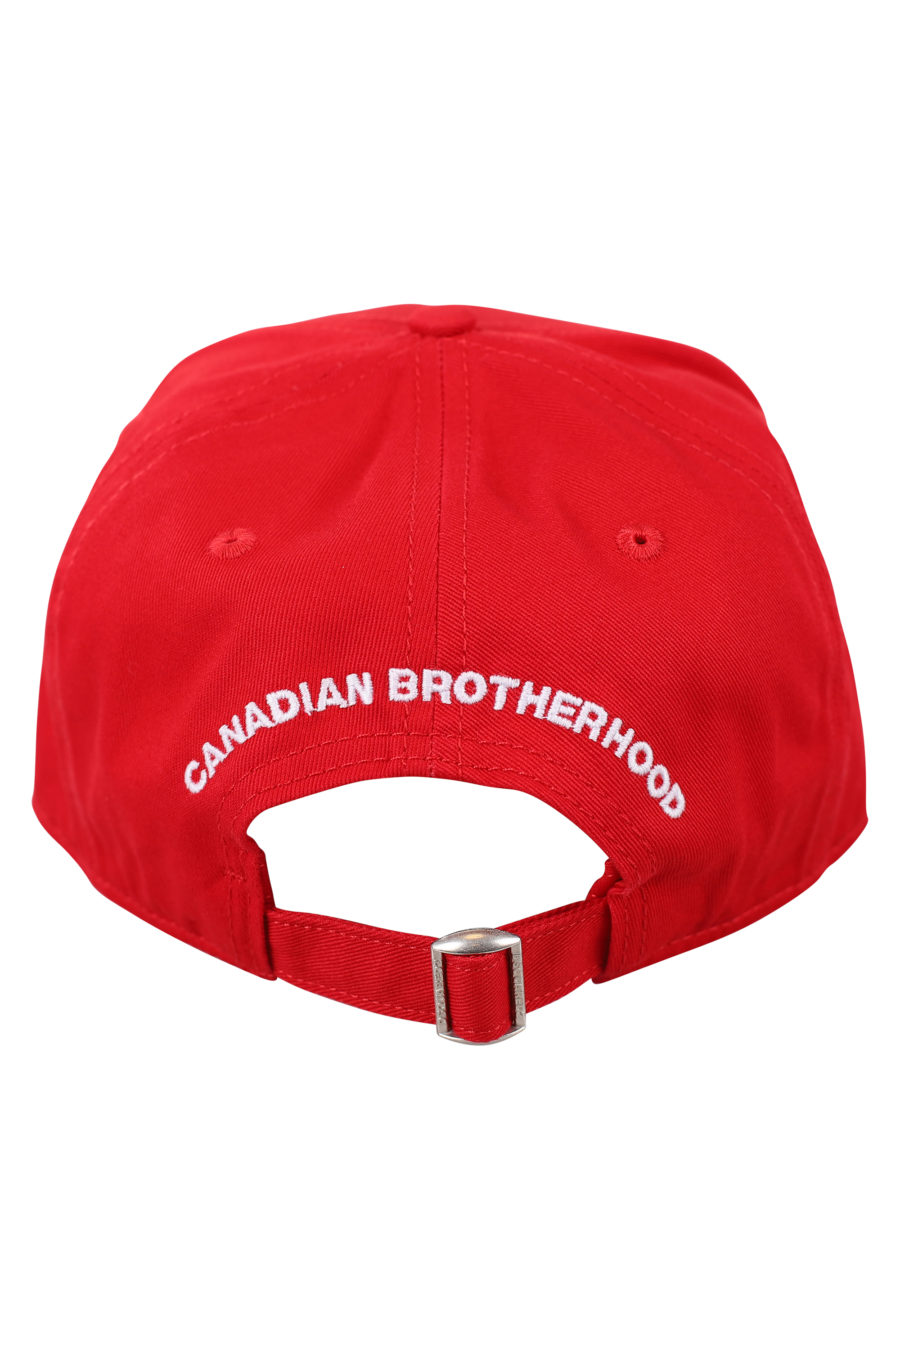 Adjustable red cap with small white logo - IMG 0470